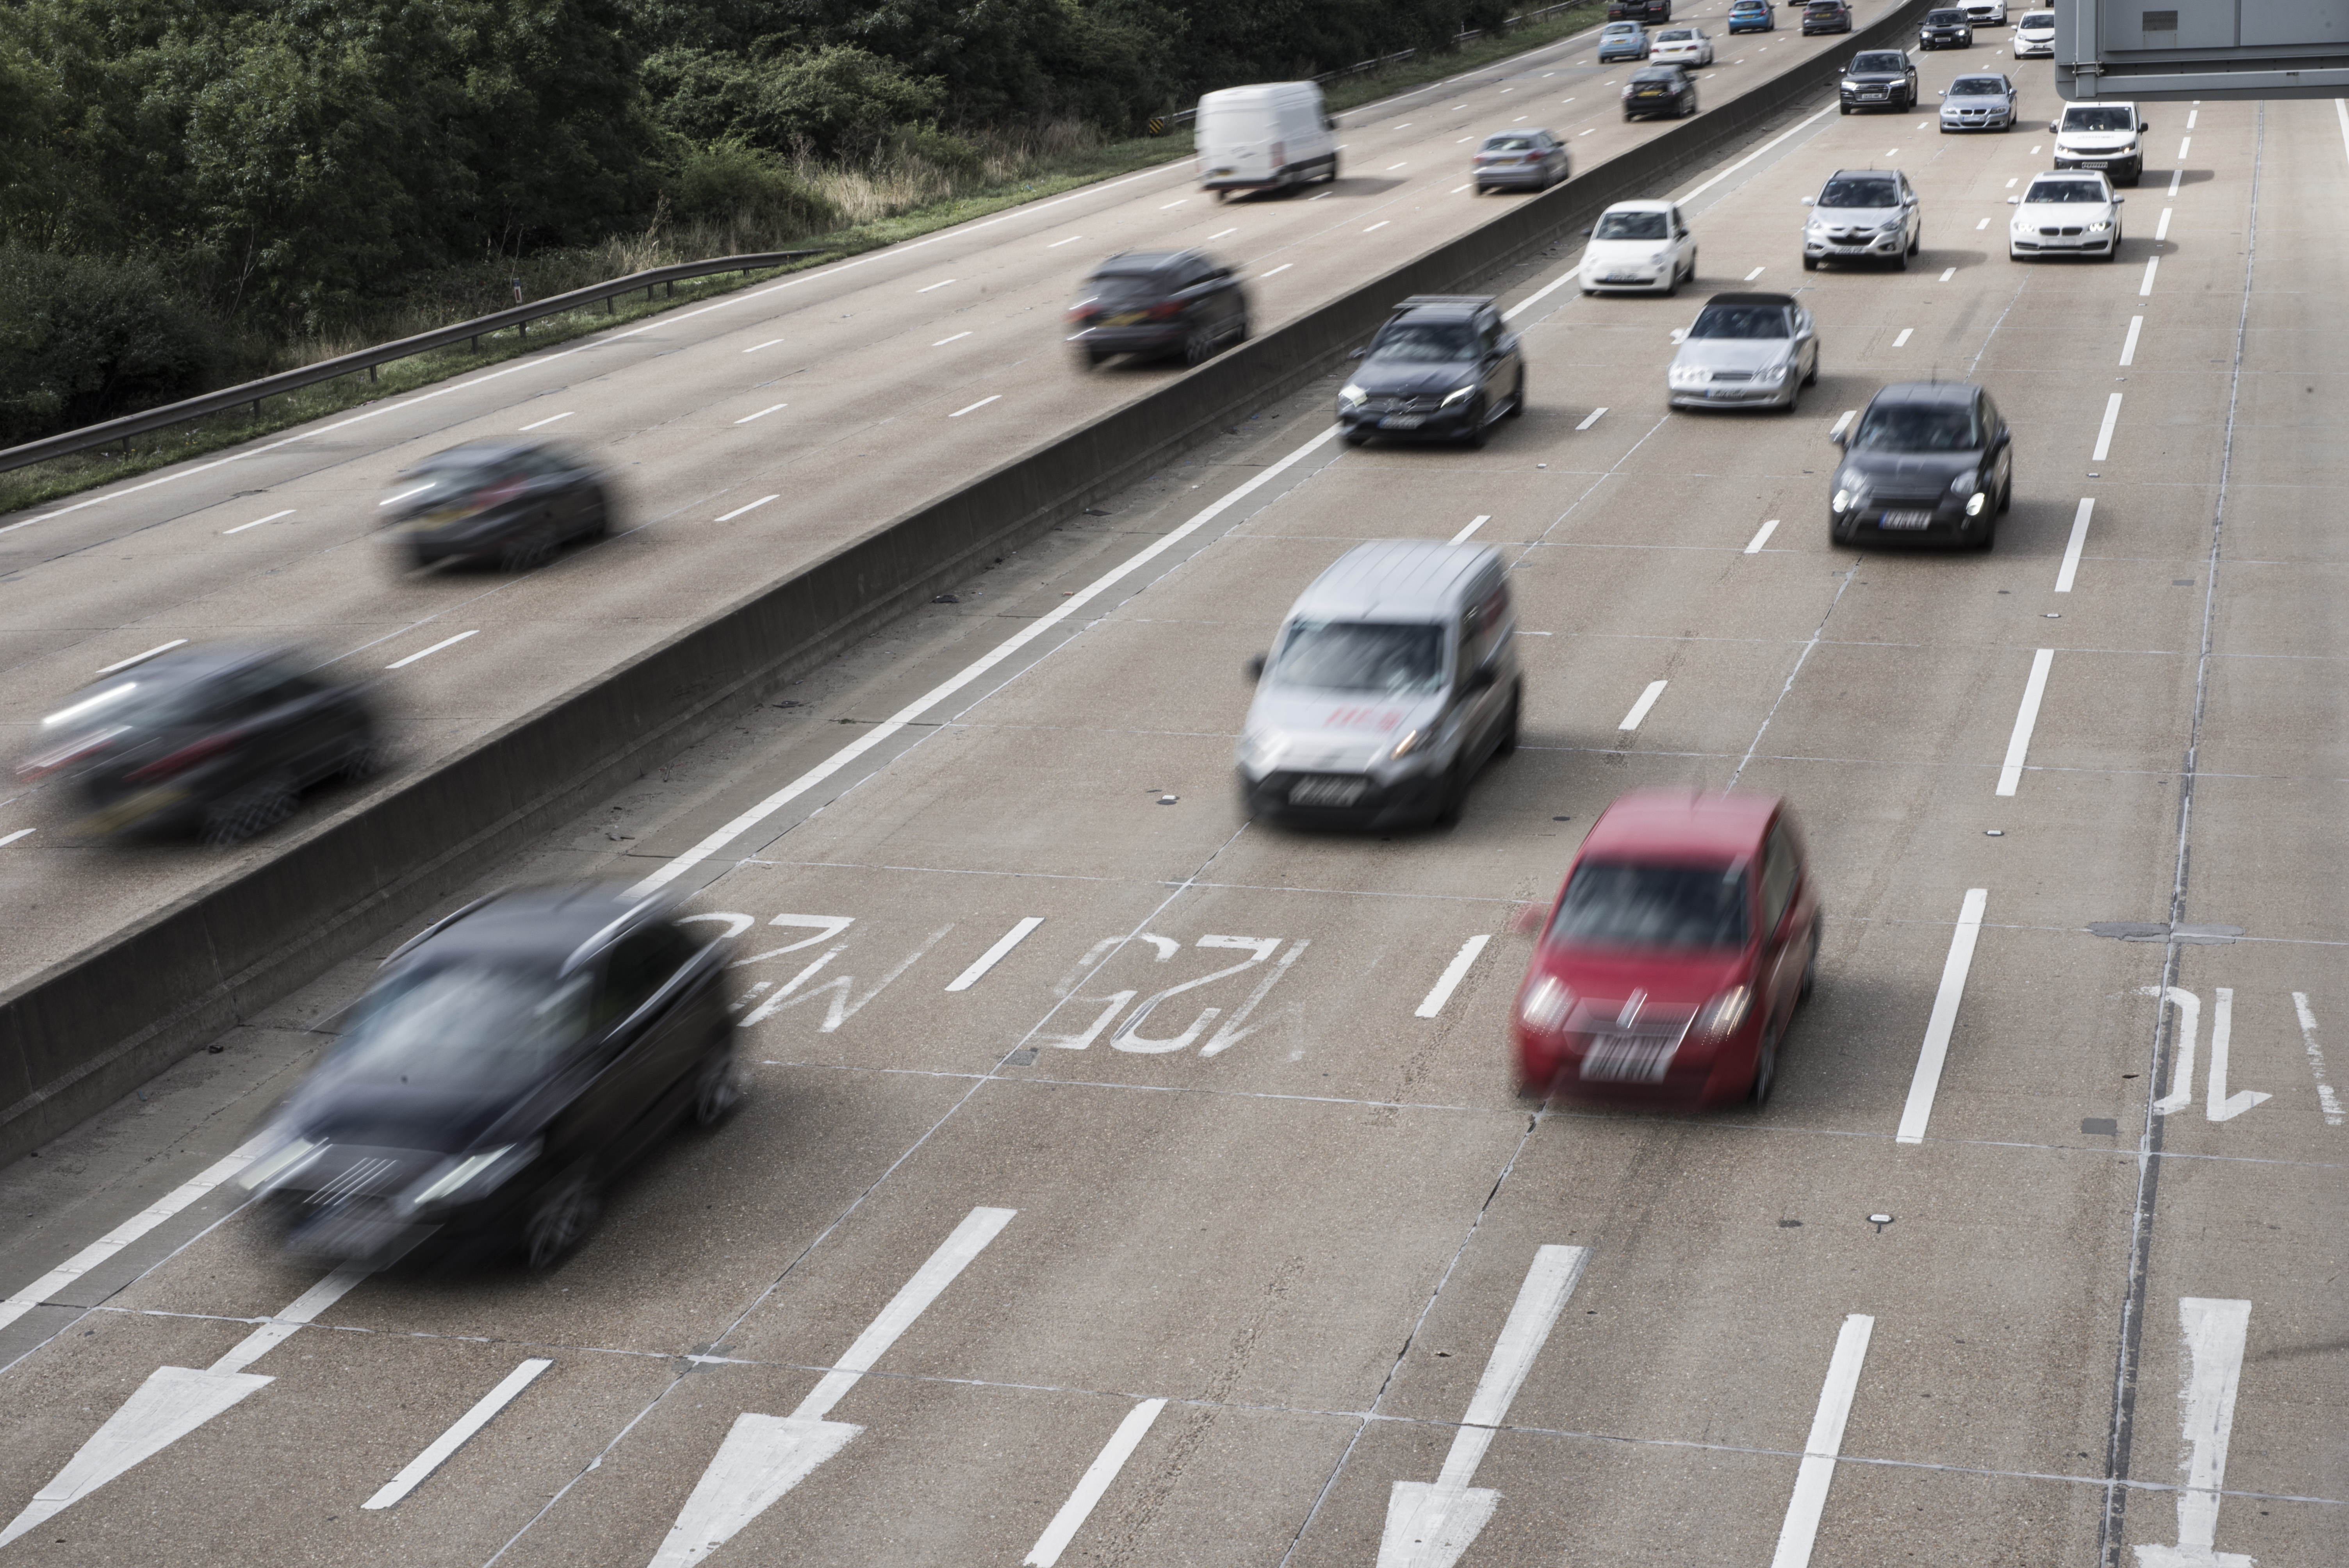 The busy M25 motorway is due to close for planned engineering works over the weekend